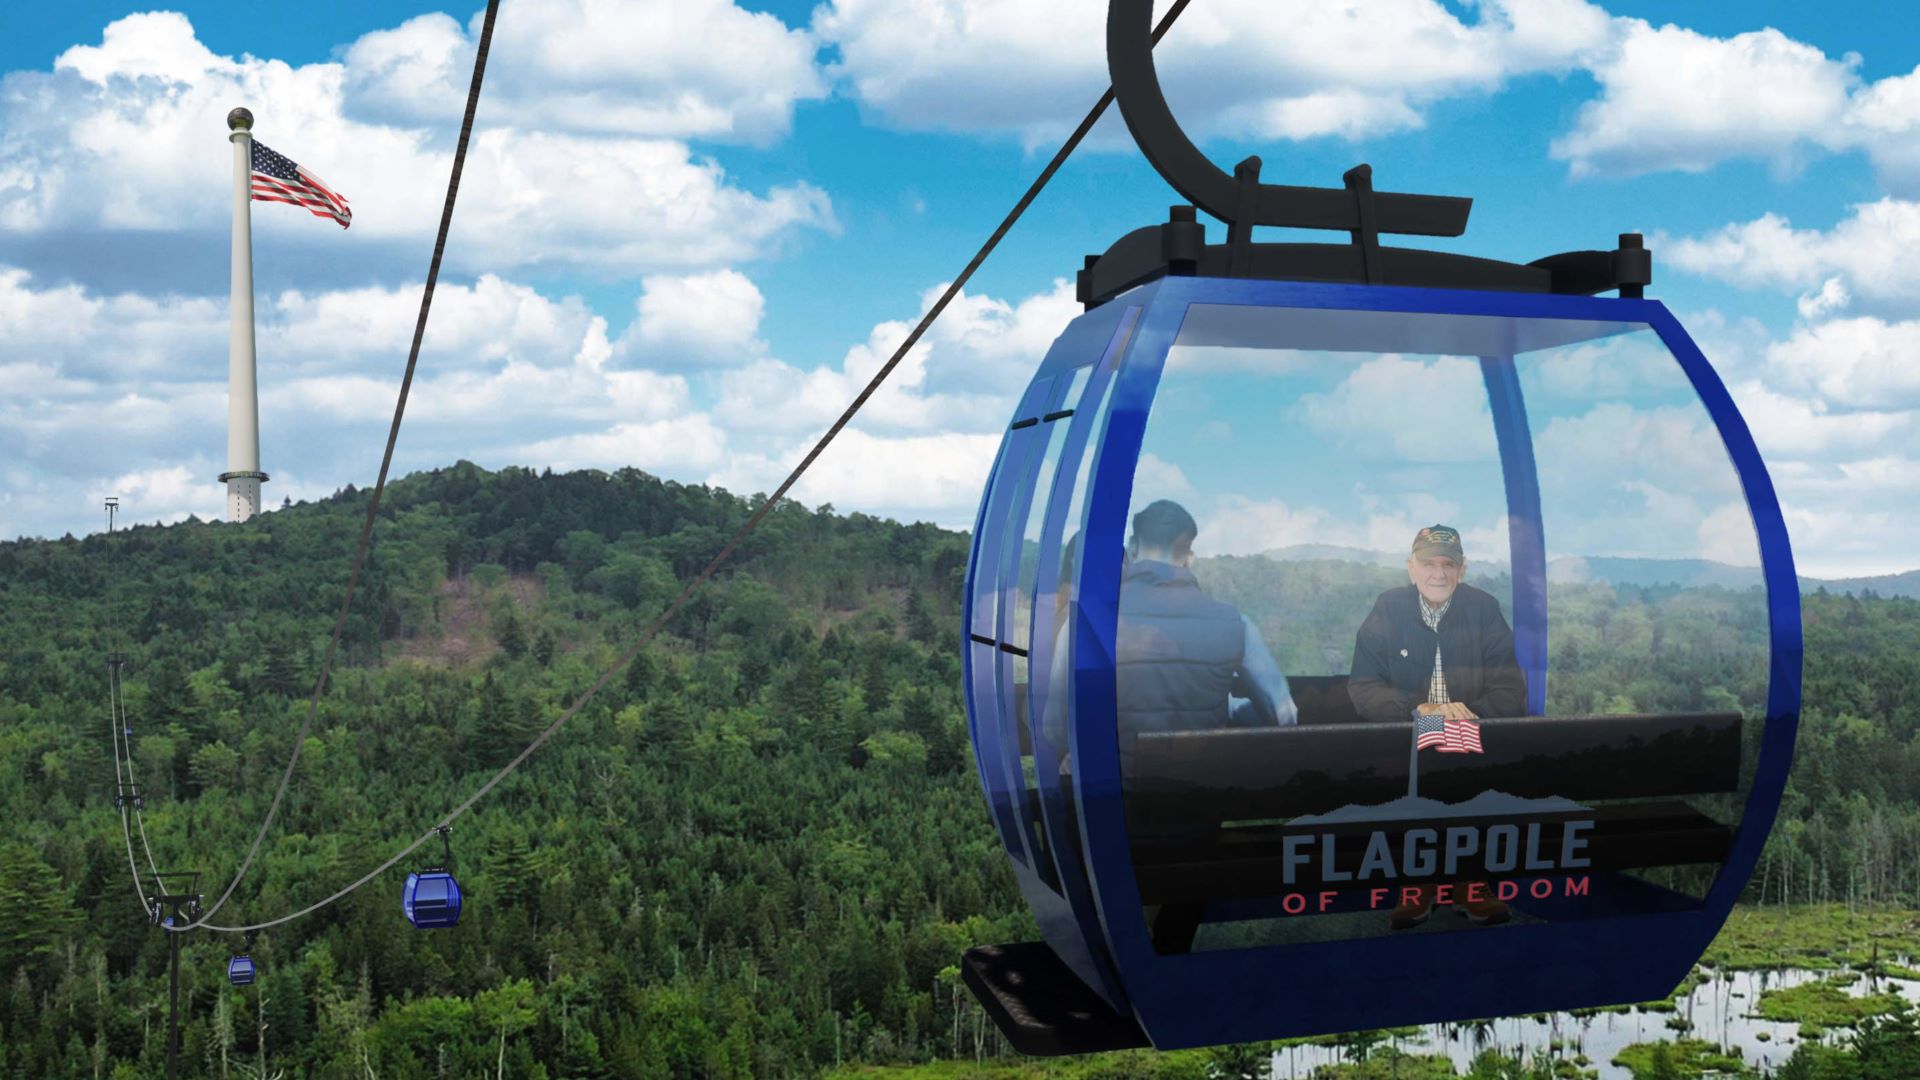 A rendering of how the gondola will look